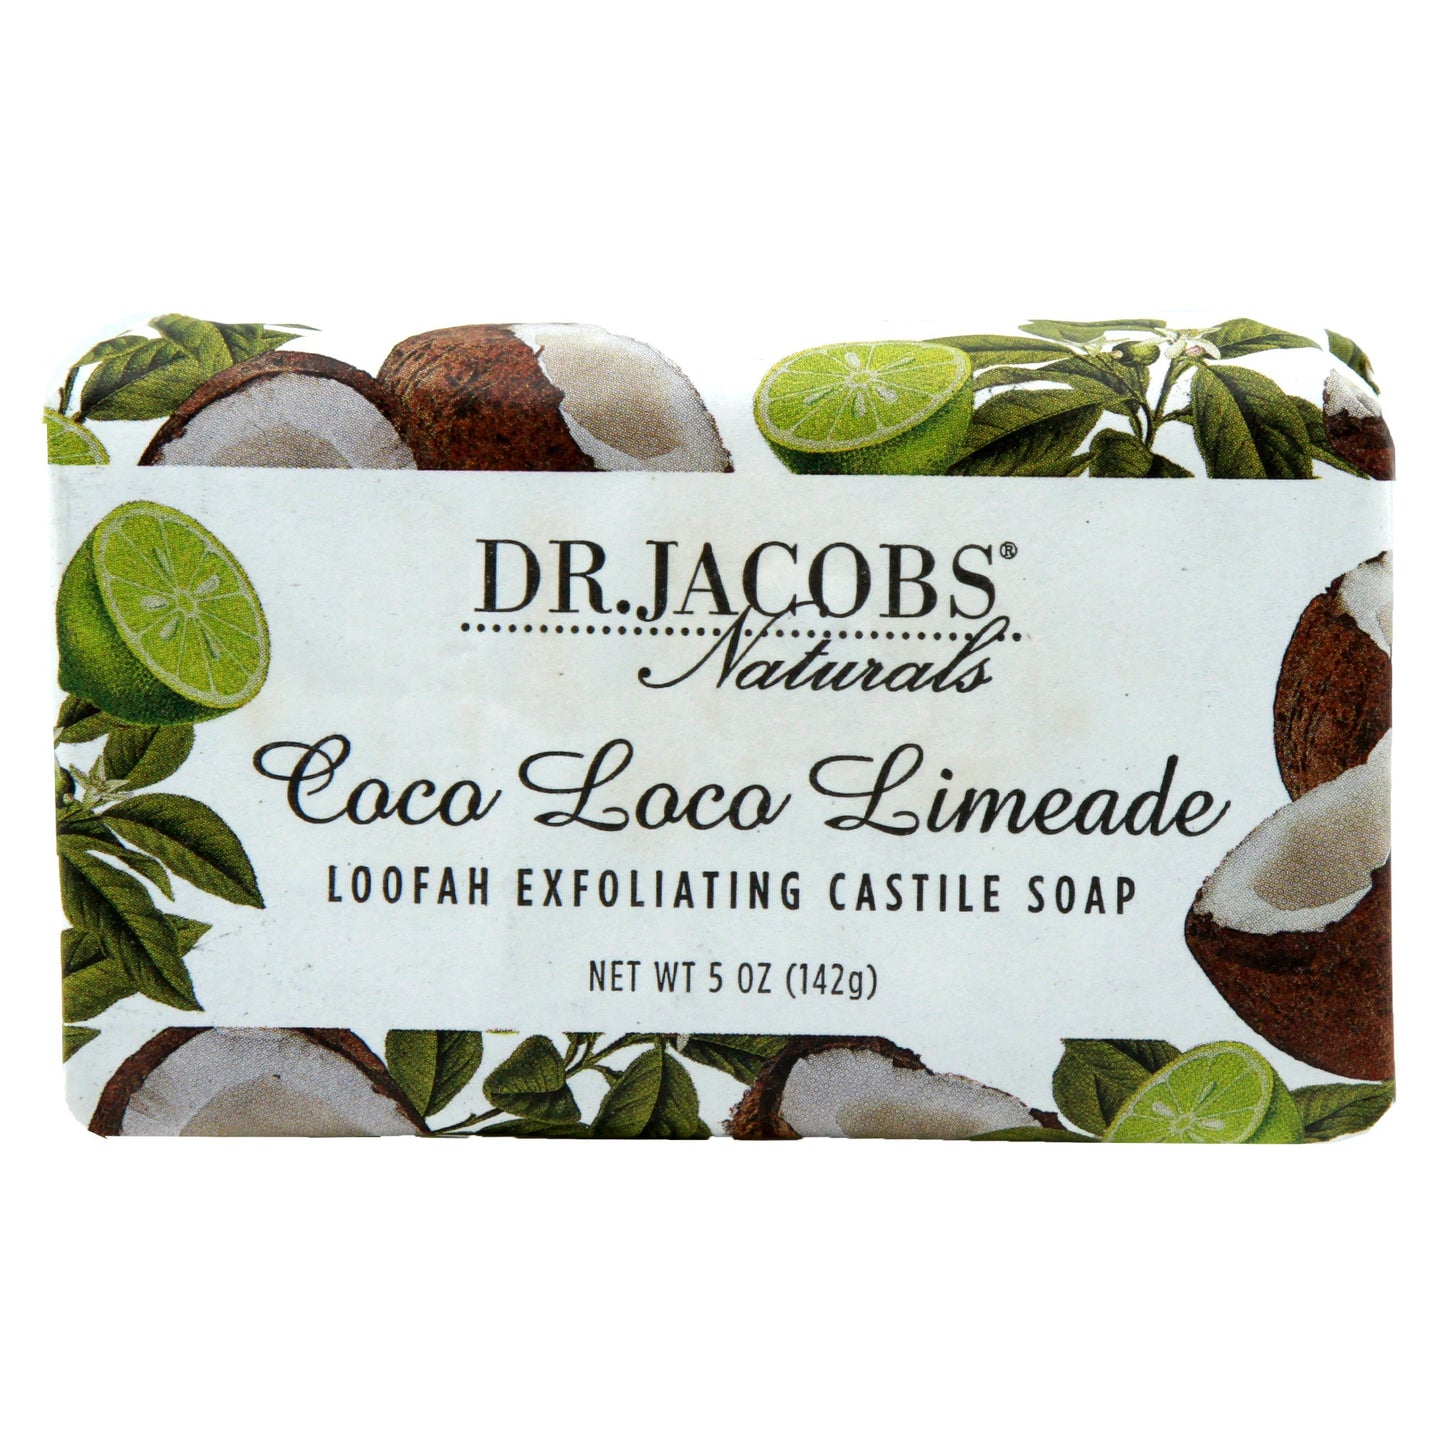 Coco Loco Limeade by Dr. Jacobs Naturals